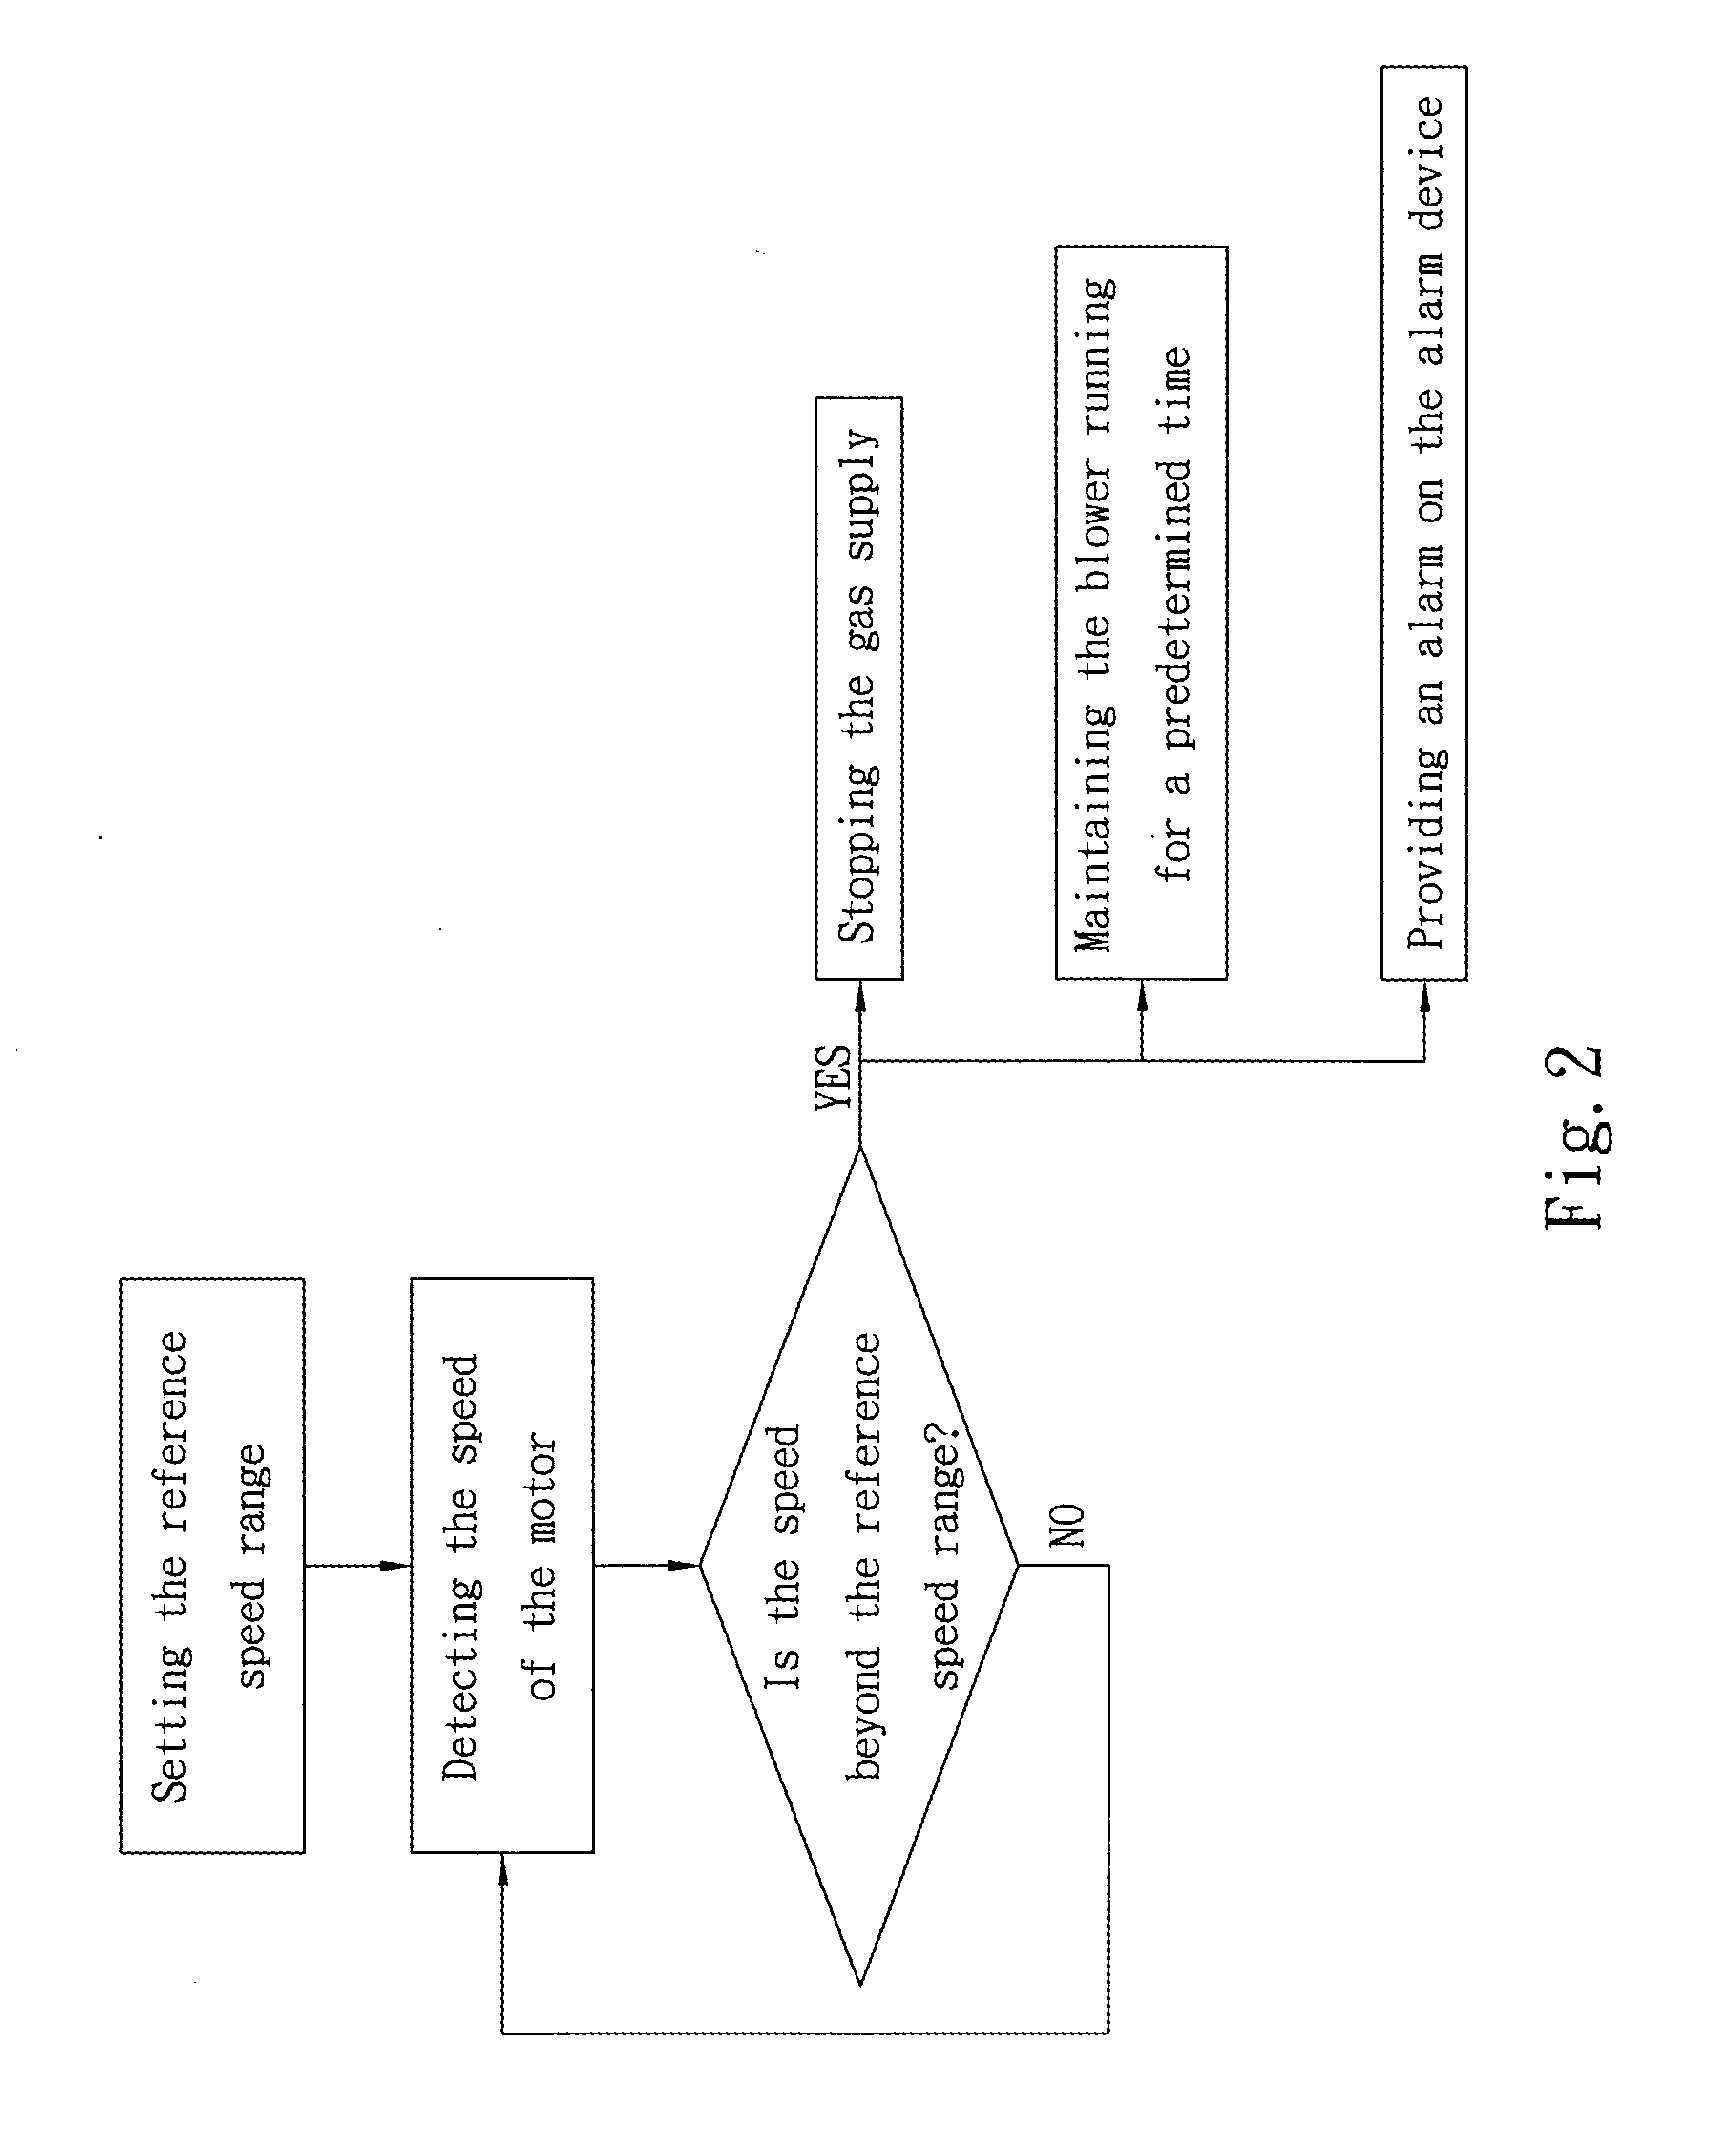 Direct vent/power vent water heater and method of testing for safety thereof